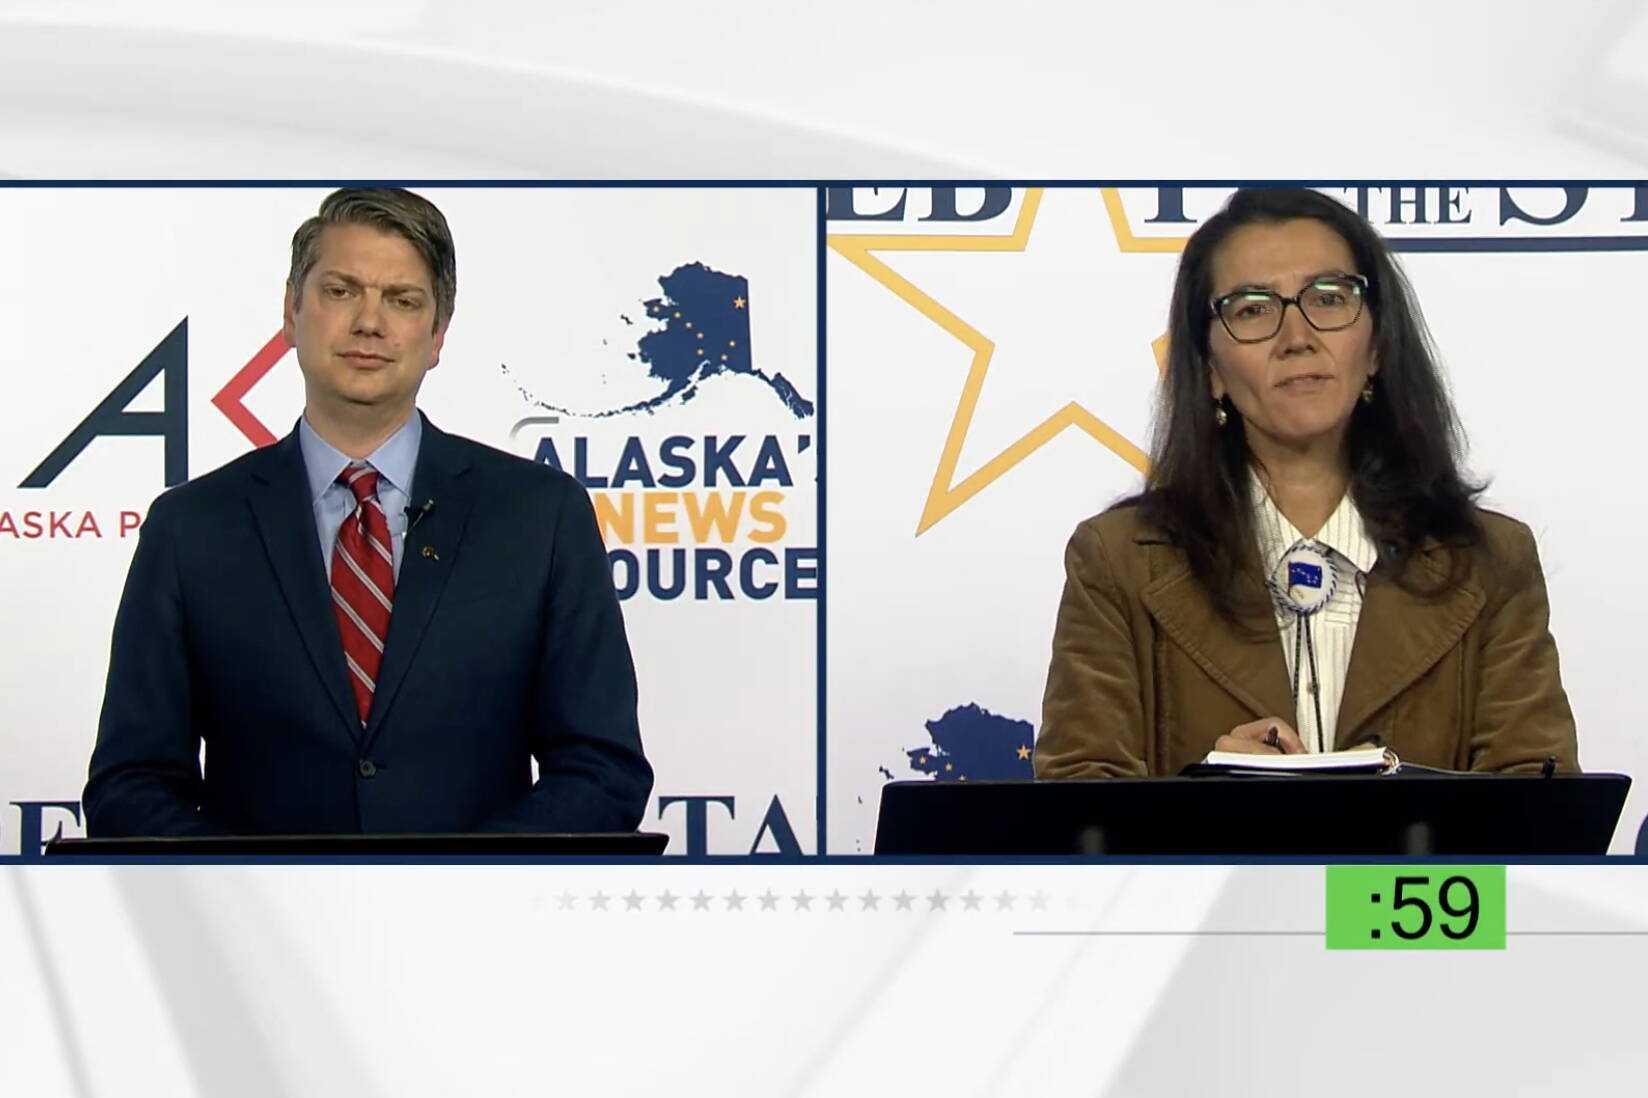 This screenshot from Republican Nick Begich, left, challenges Democratic U.S. Rep. Mary Peltola about her retaining much of former Rep. Don Young’s staff during a statewide televised debate Wednesday. (Screenshot)